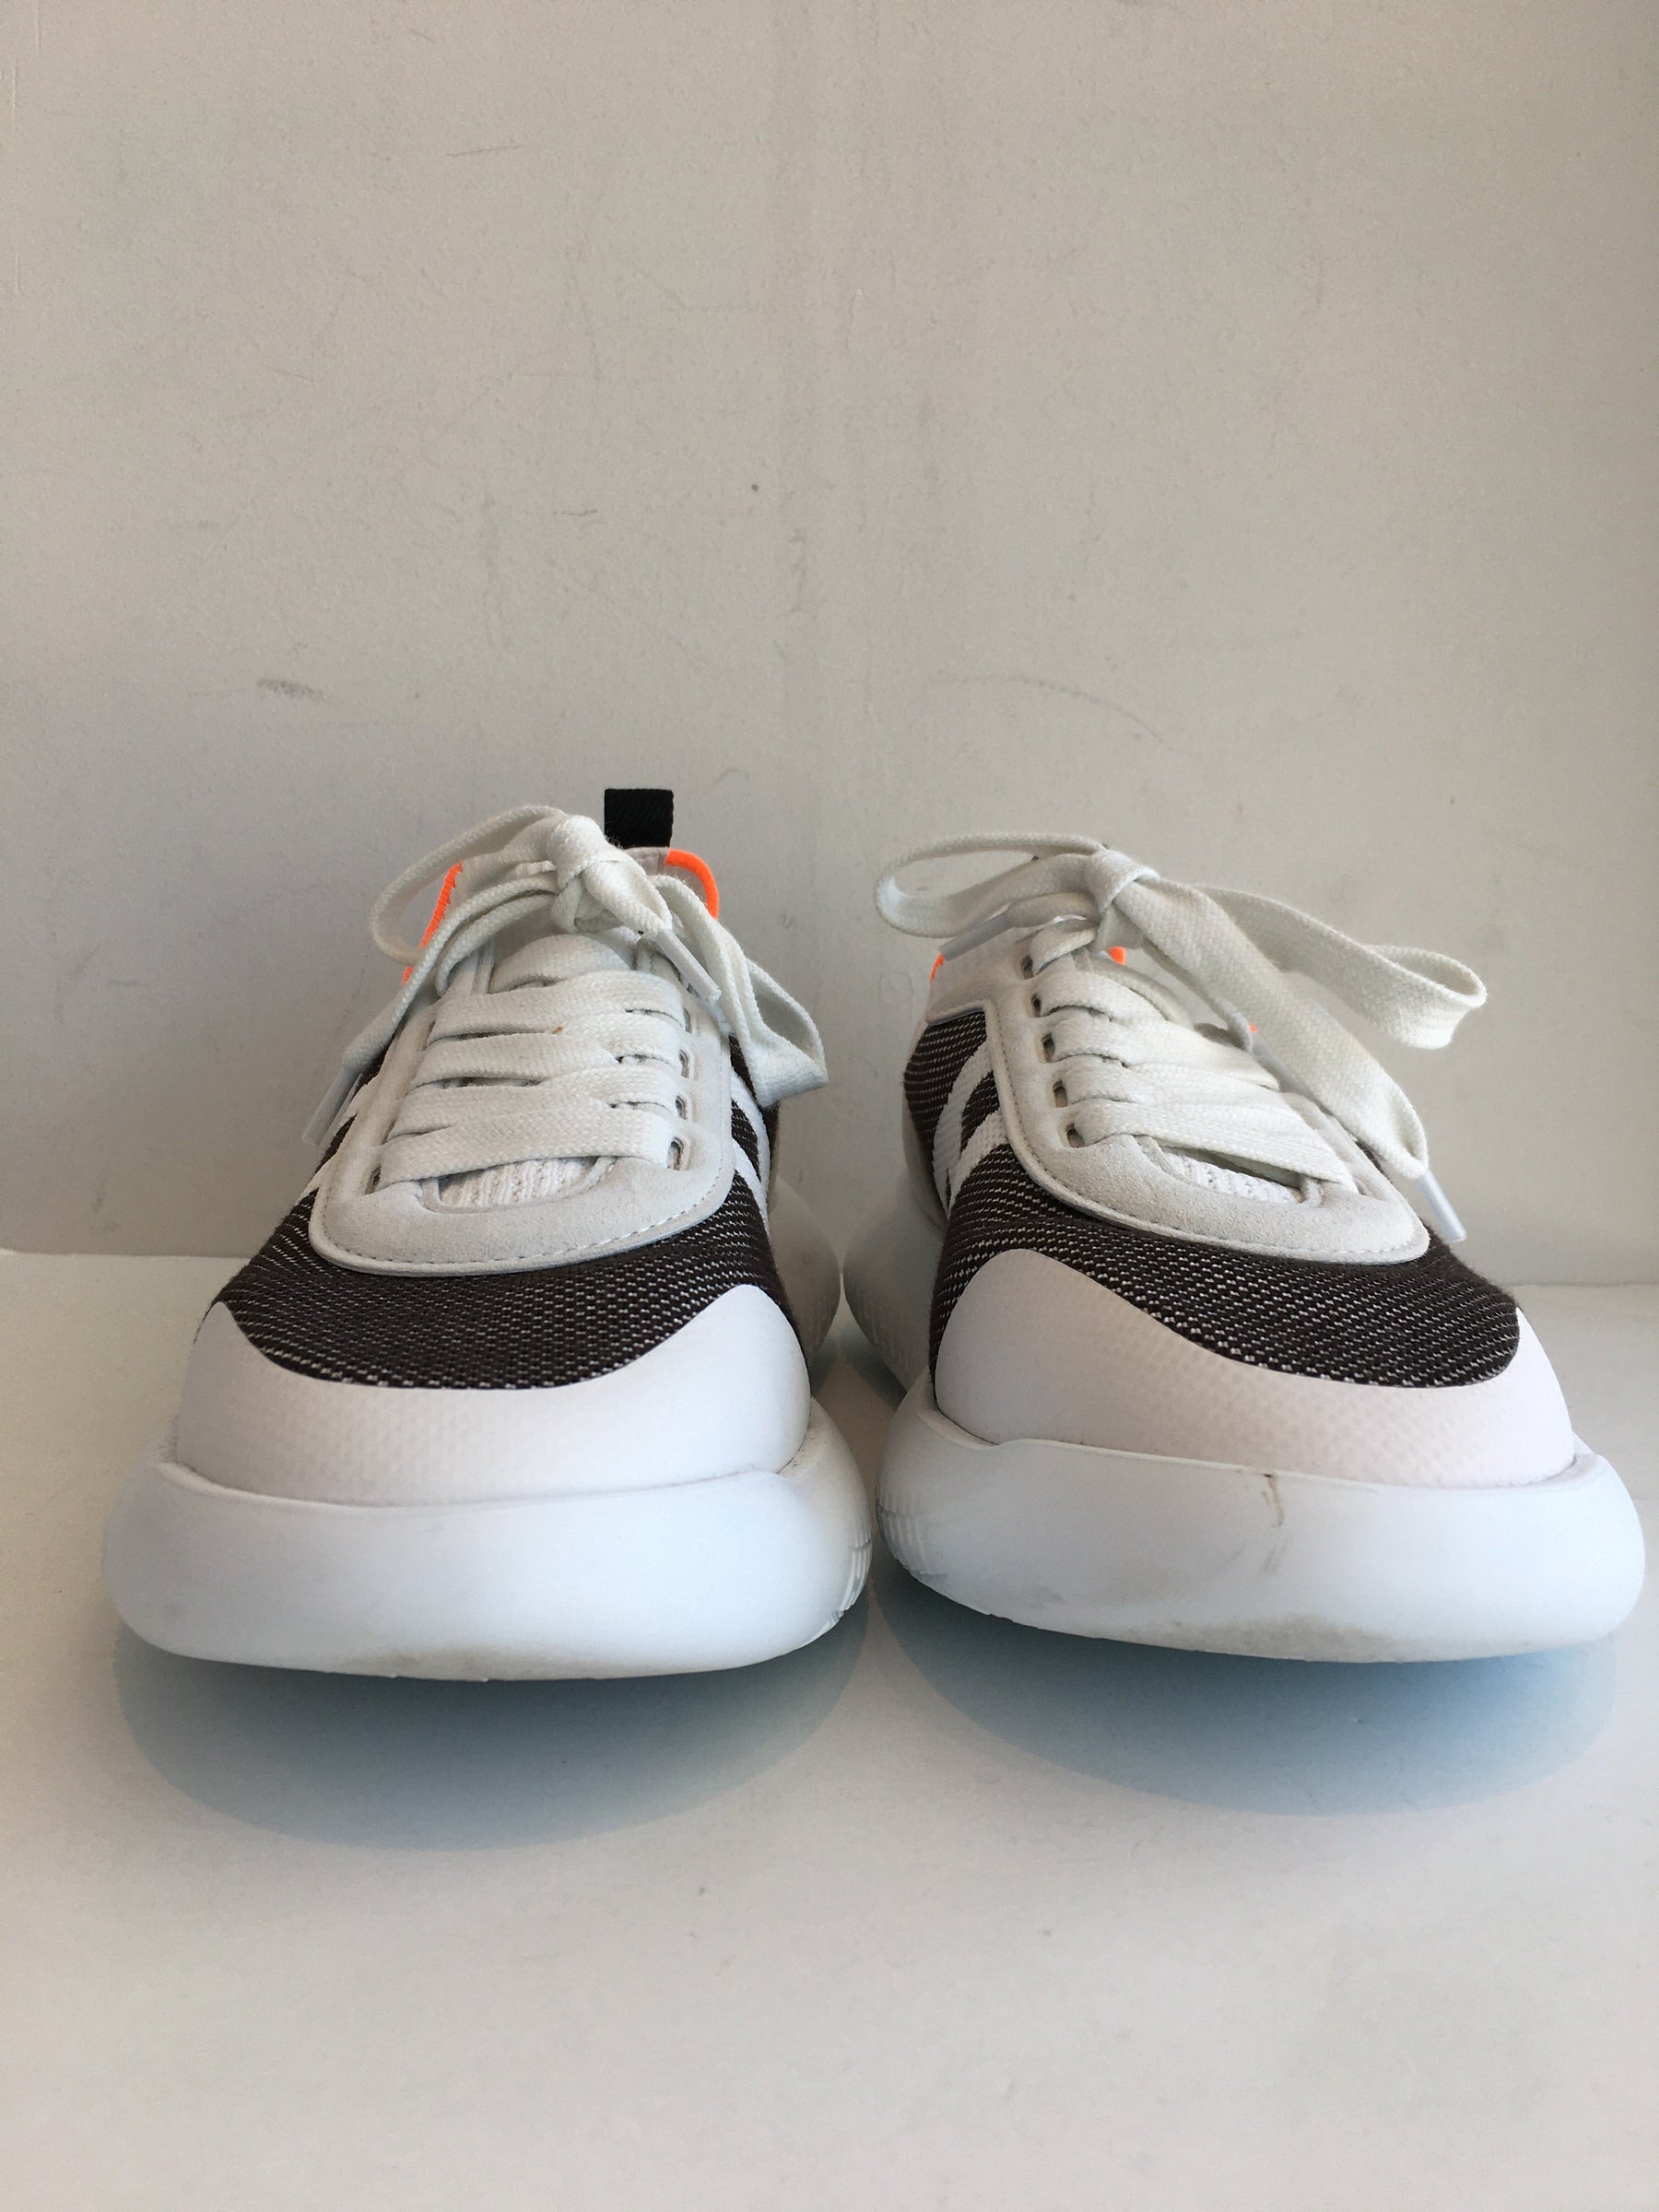 Hermès Crew Running Sneakers in White and Orange Front